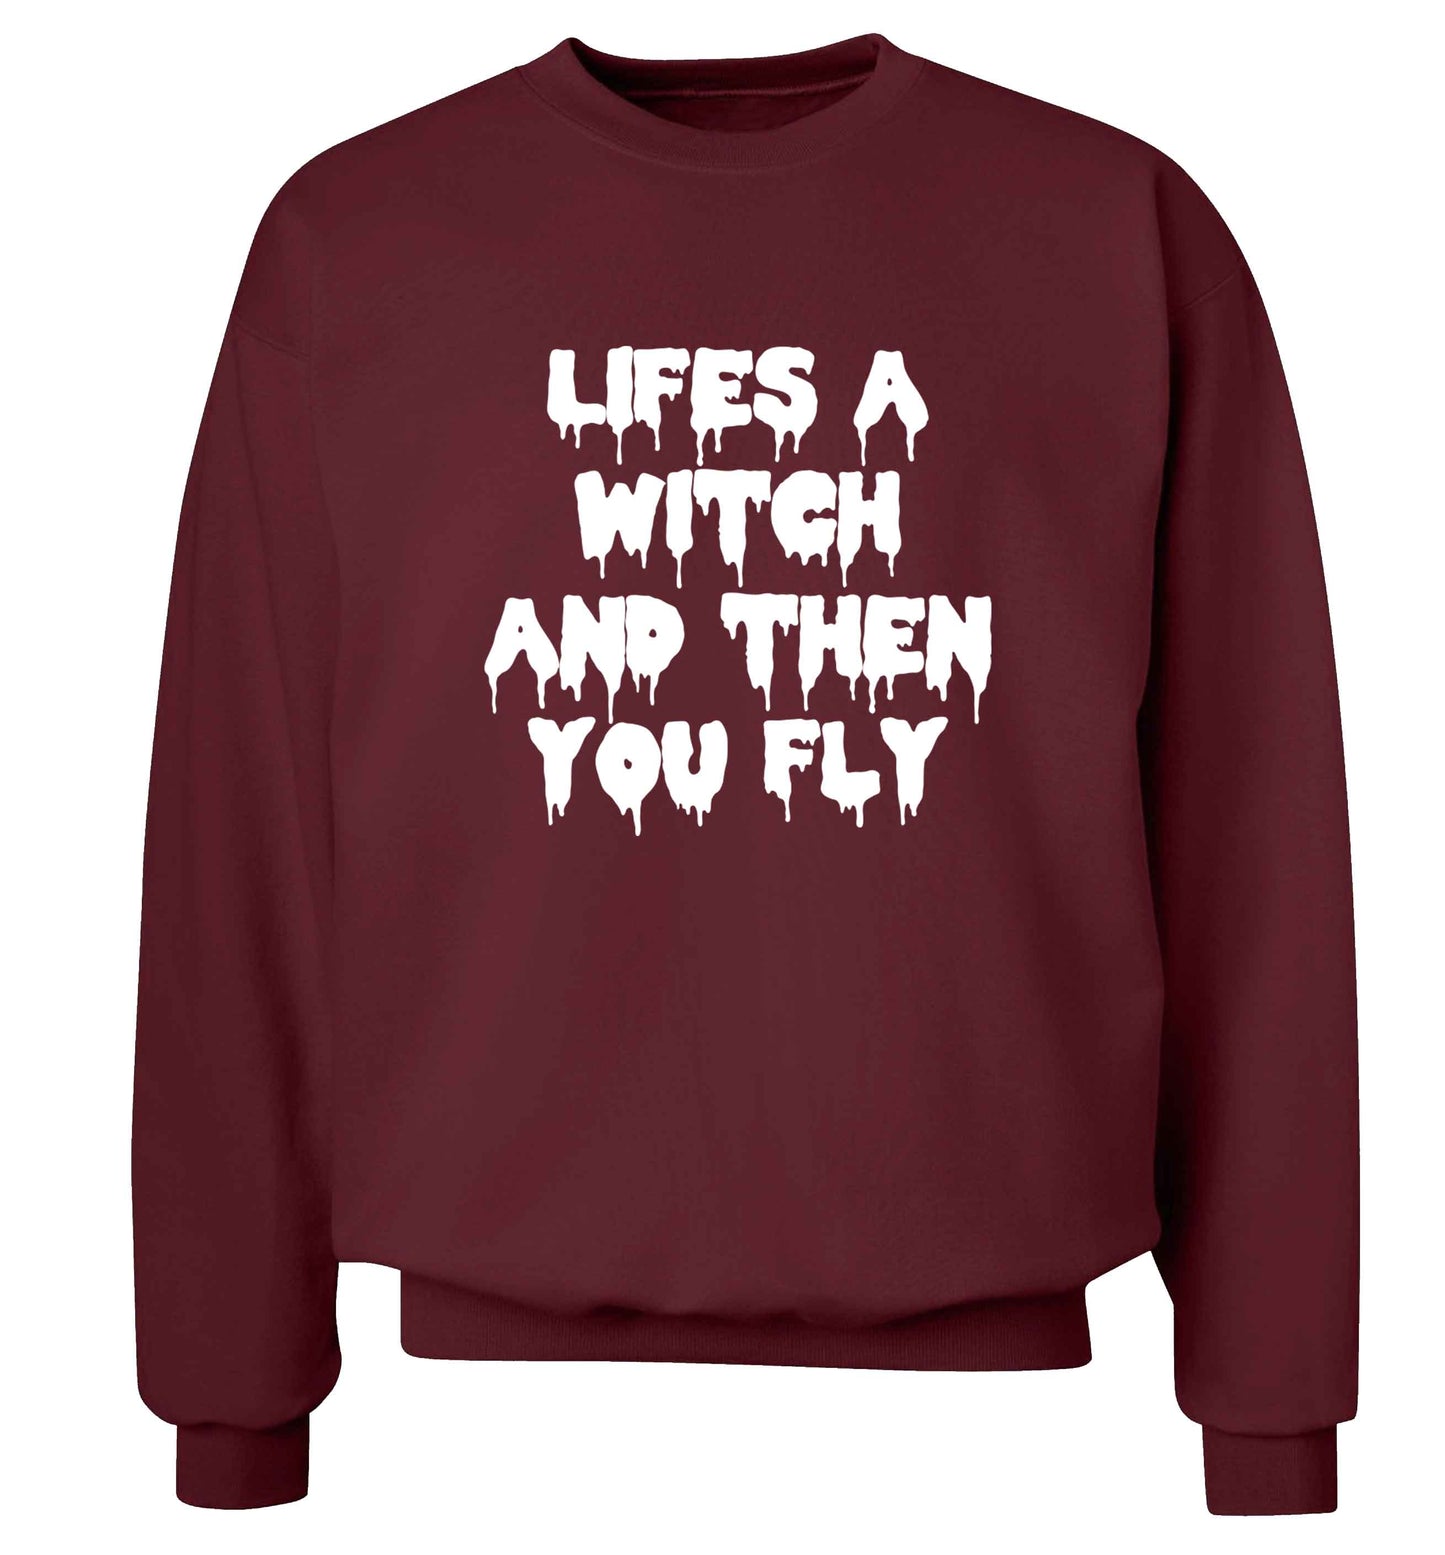 Life's a witch and then you fly adult's unisex maroon sweater 2XL